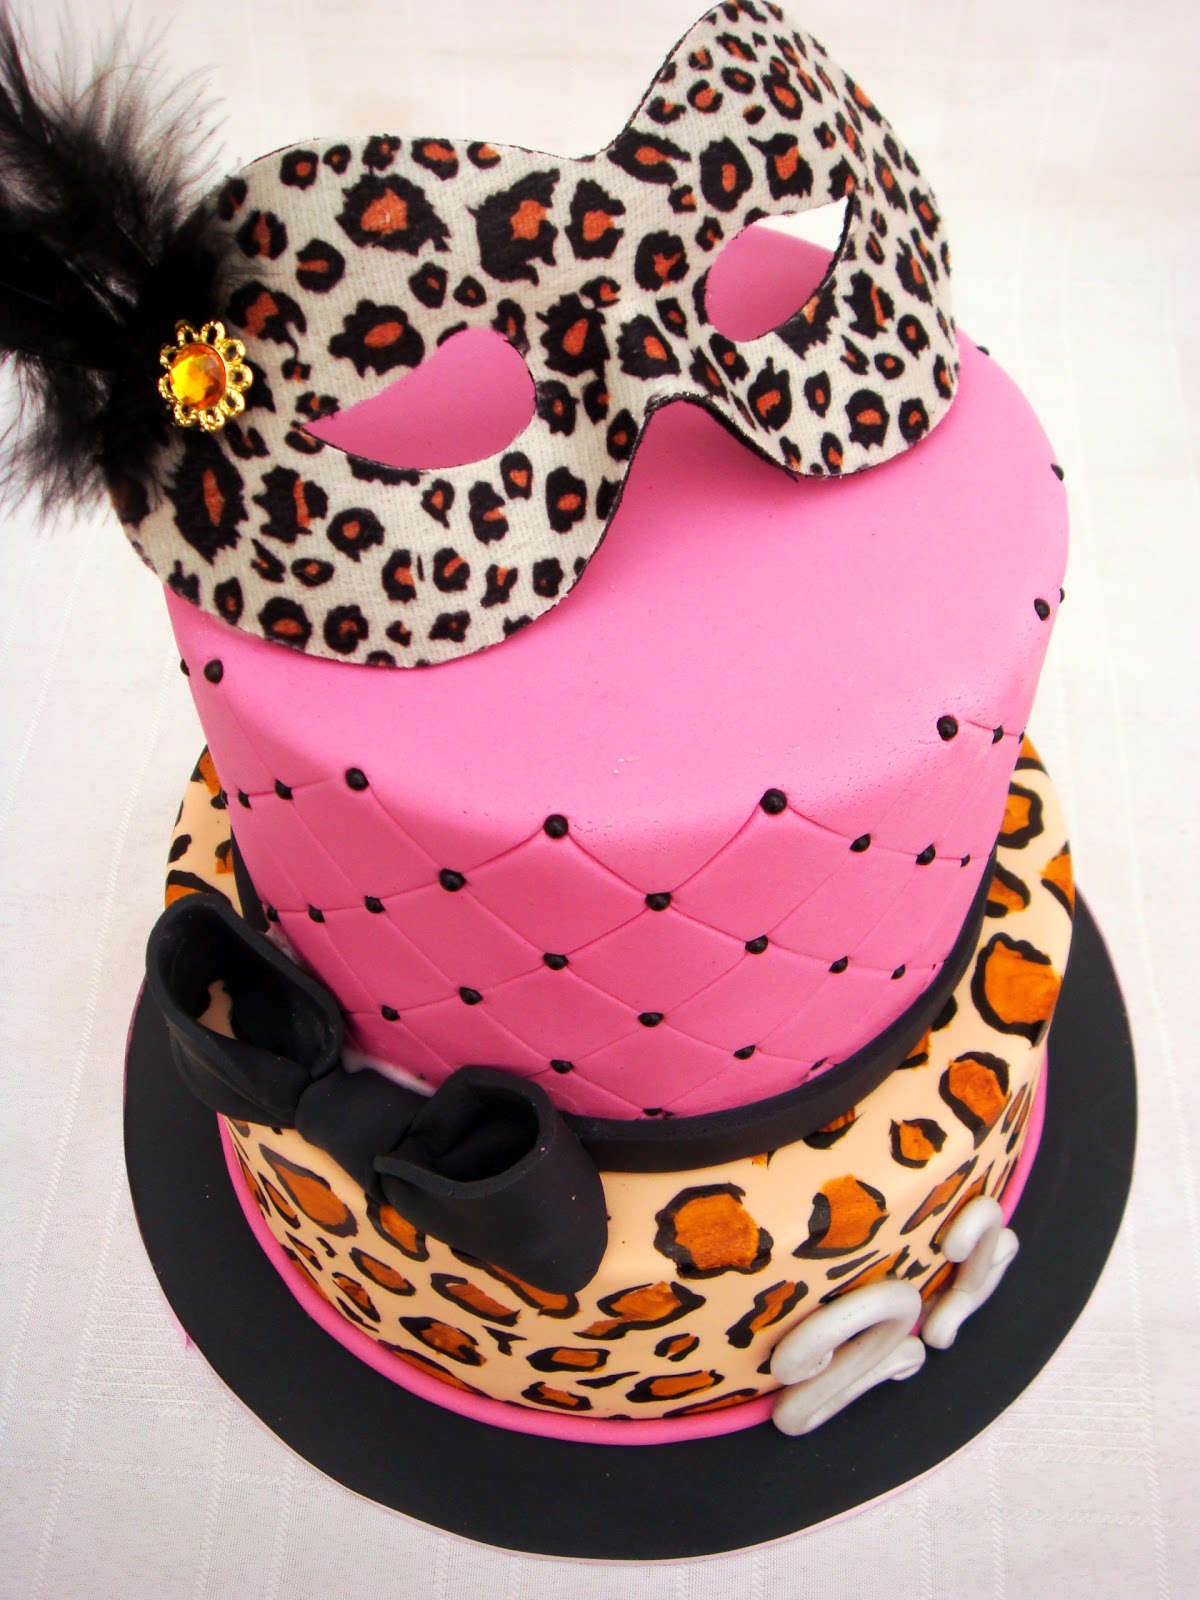 12 Photos of Pink And Black Leopard Print Cakes